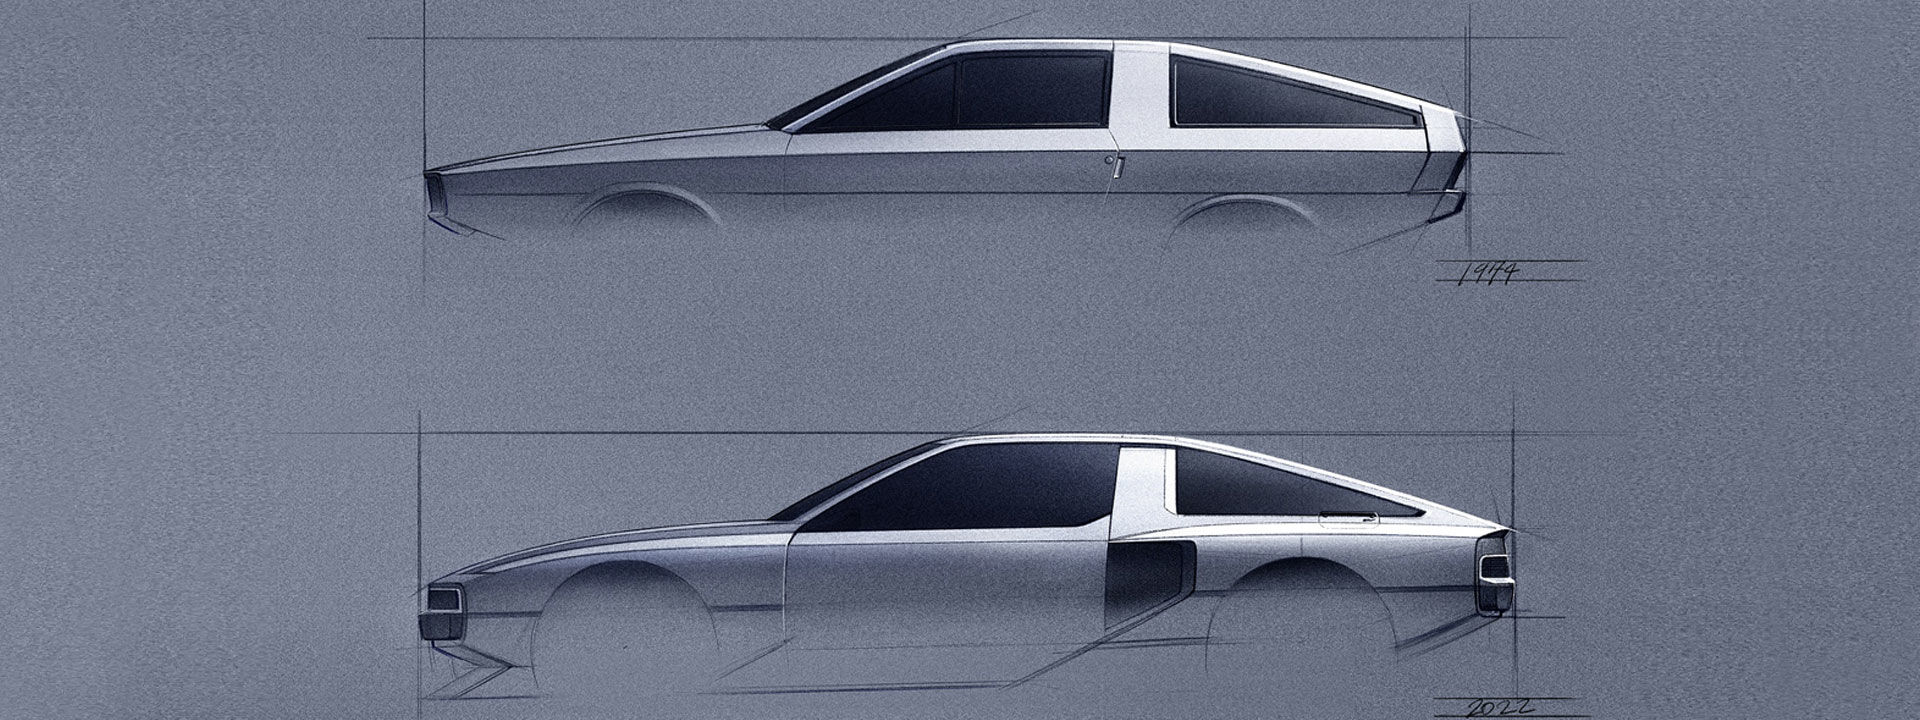 Pony-Coupe-Concept-and-N-Vision-74-Sketch_1920x720.jpg